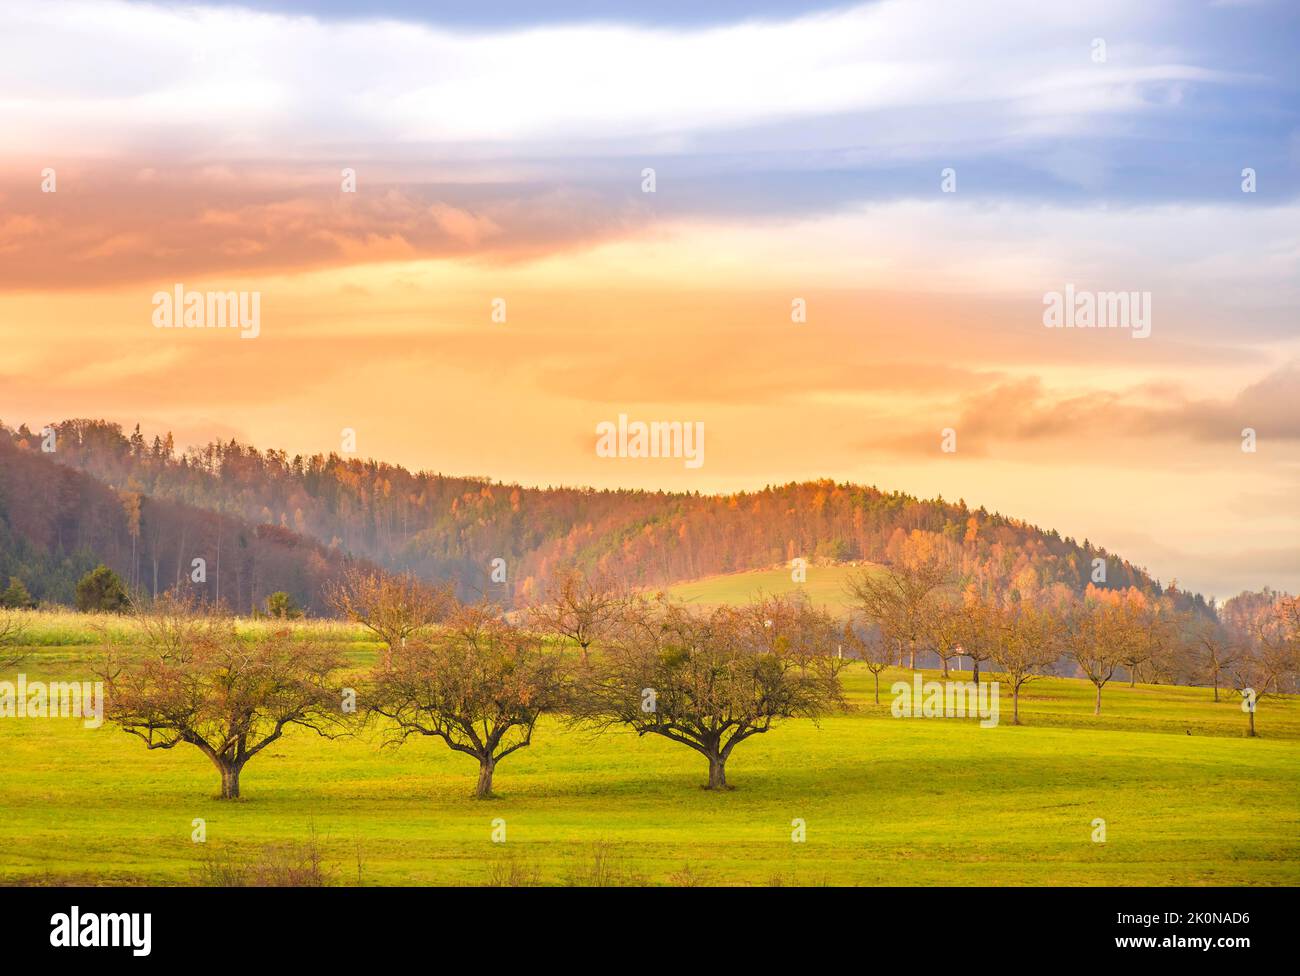 Autumn landscape with picturesque trees and colorful sunset sky Stock Photo